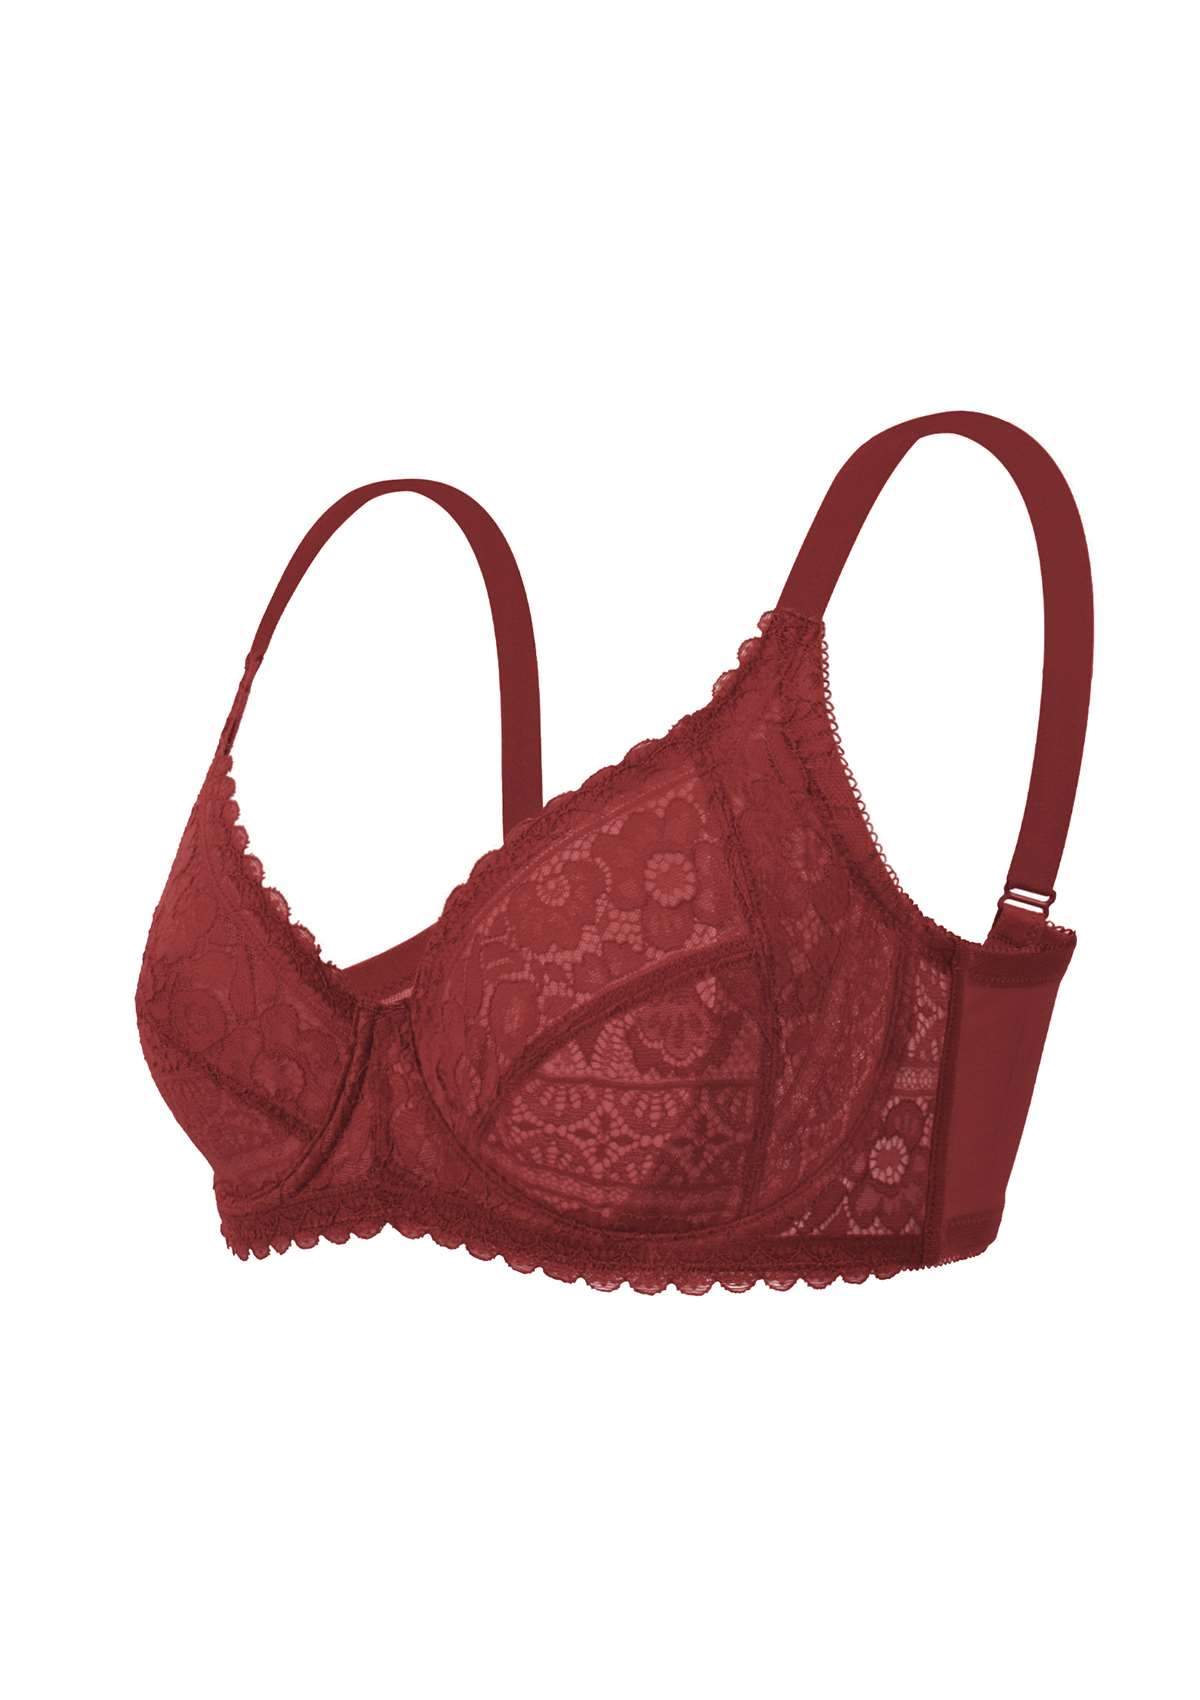 HSIA Freesia Unlined Lace Bra: Bra That Supports Back - Red / 34 / DDD/F